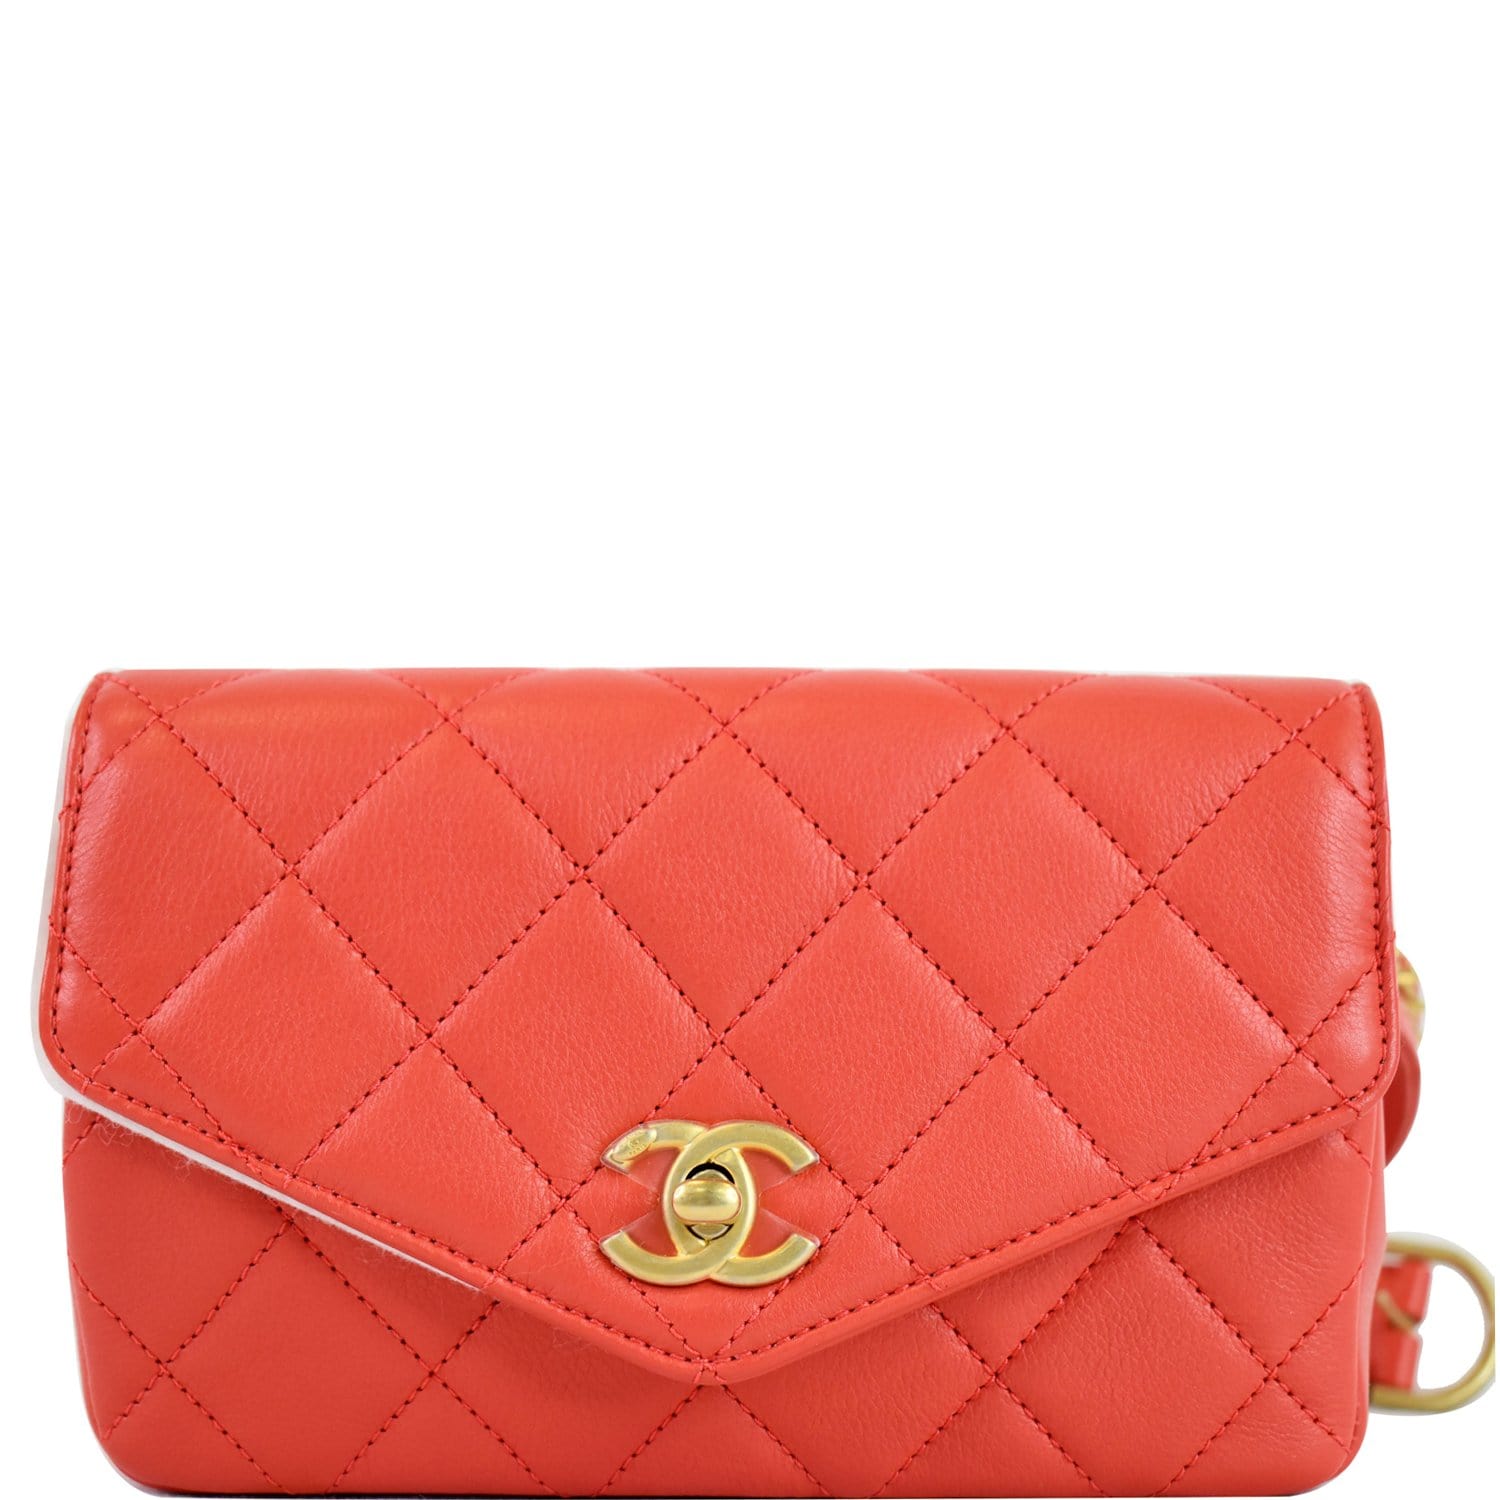 Chanel Red Leather CC Mania Waist Bag Chanel | The Luxury Closet